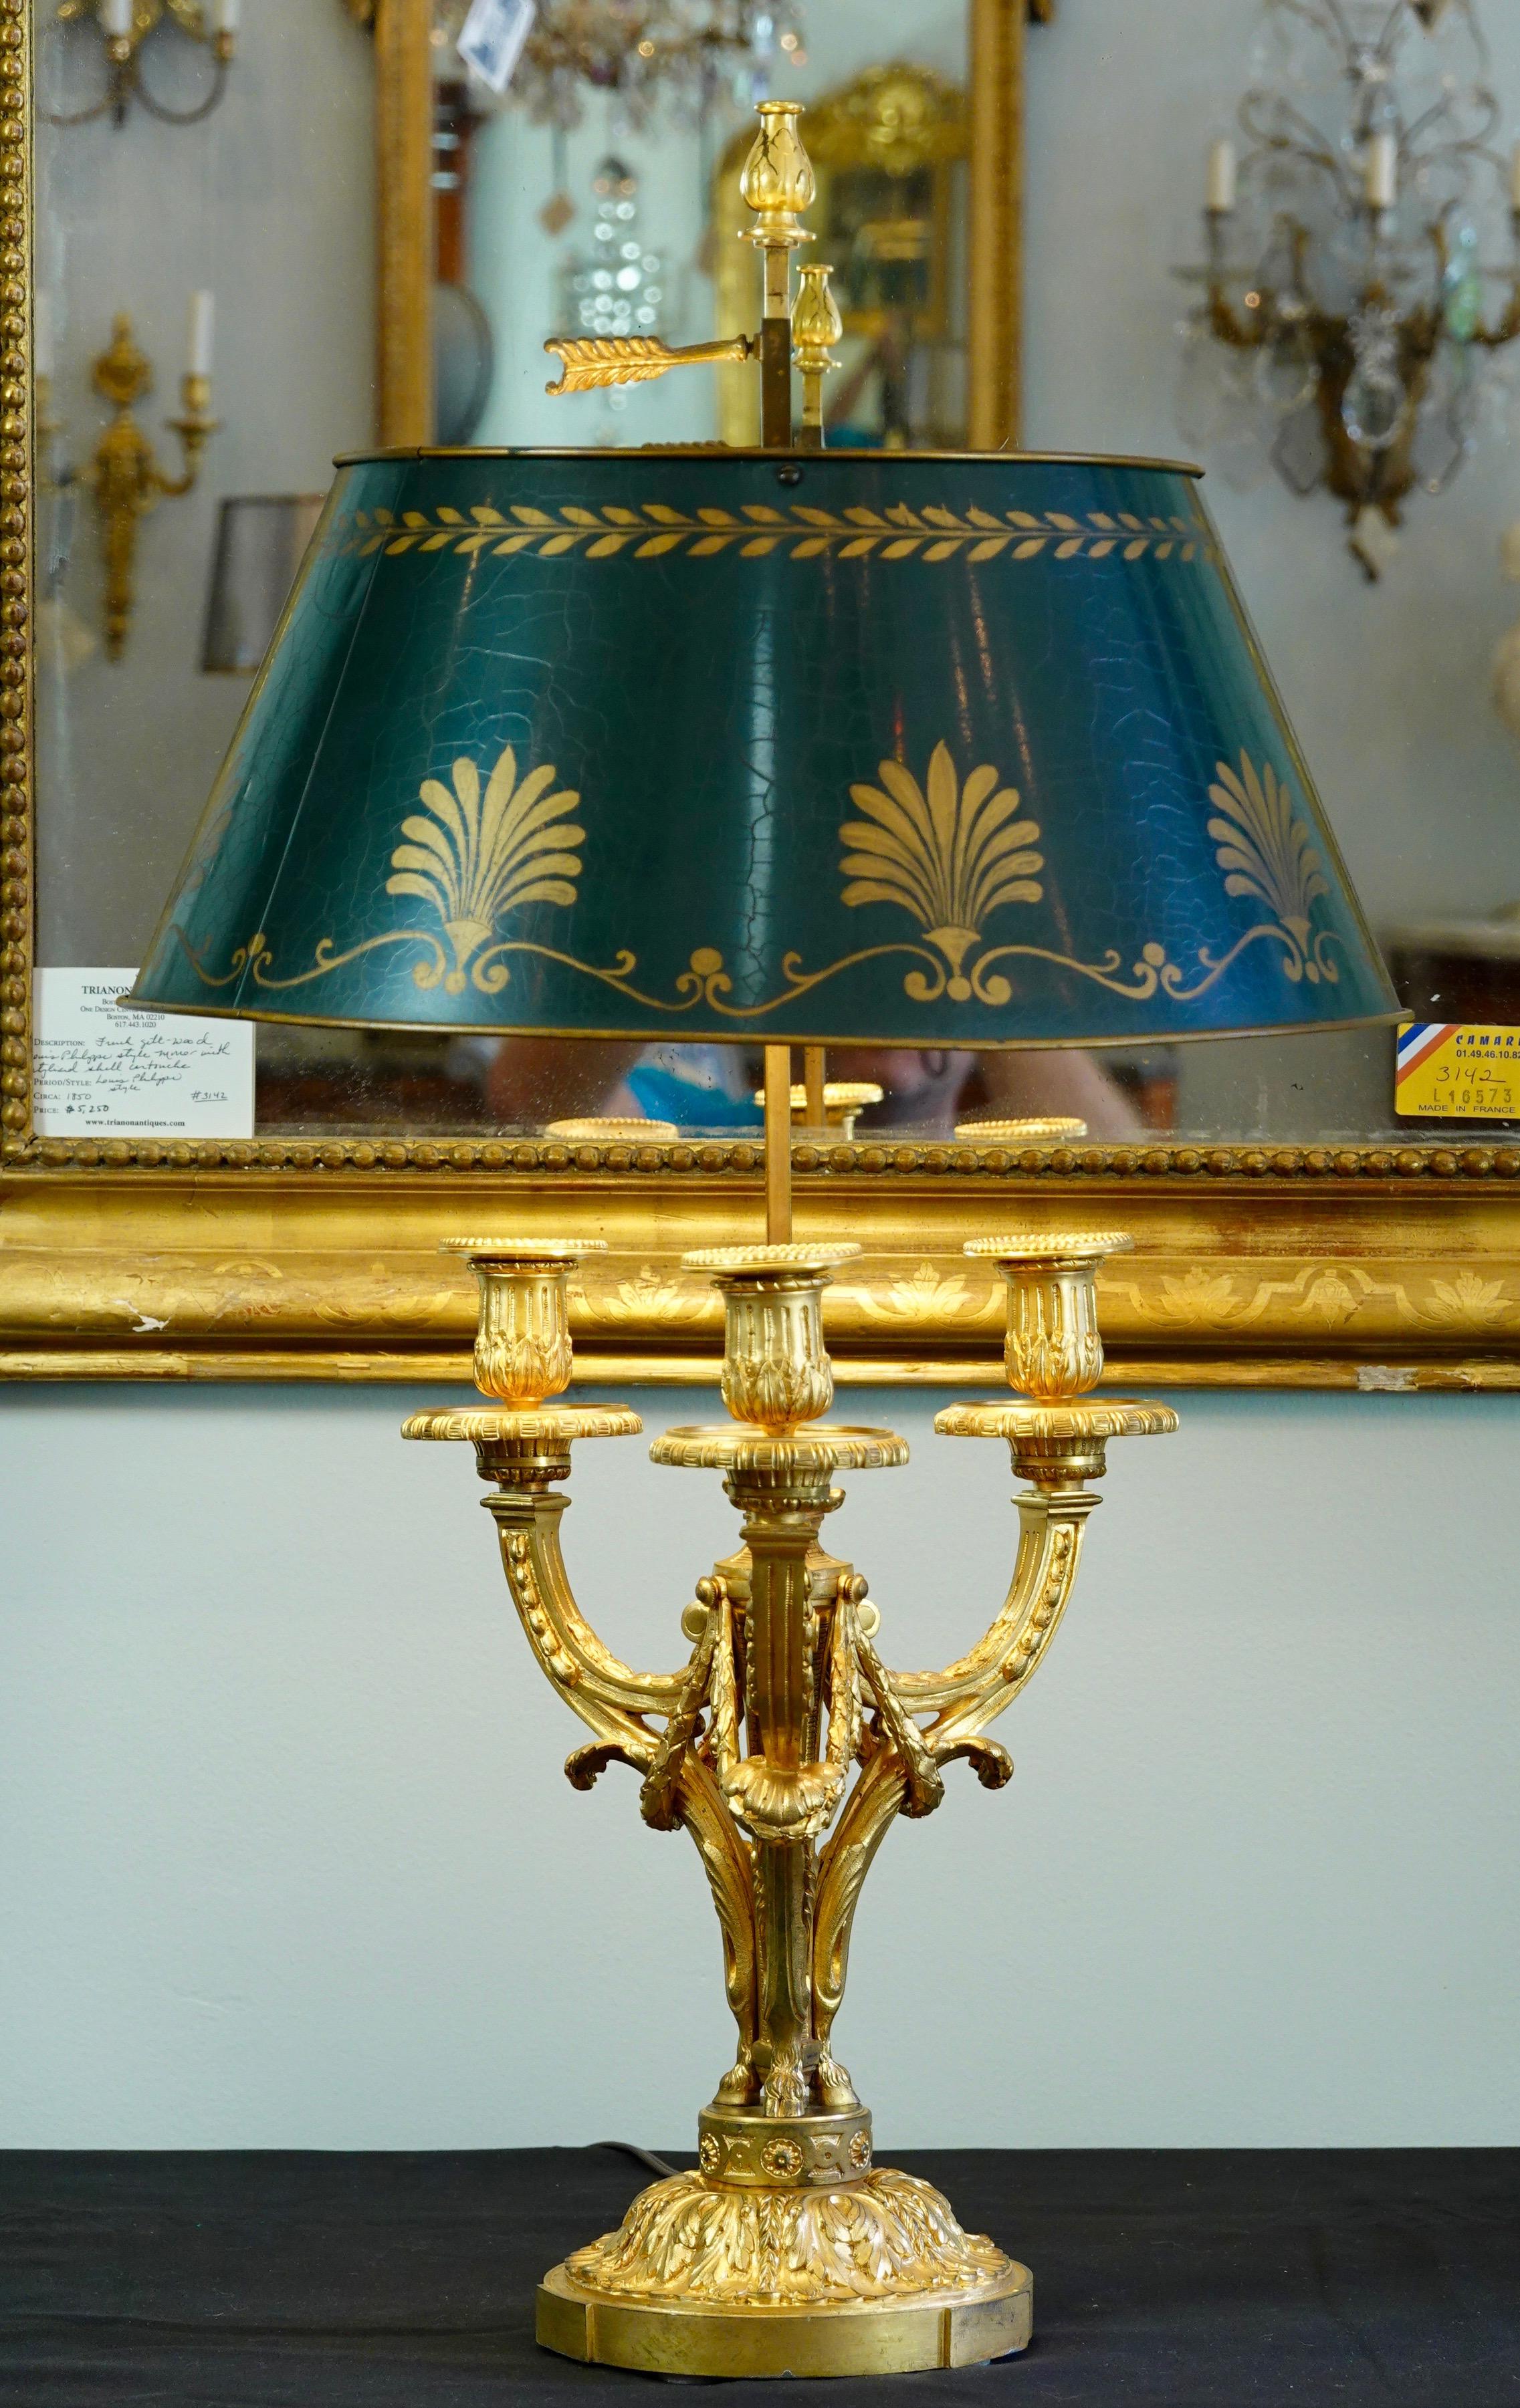 Very nice quality, French, Louis XVI style gilt bronze Bouillotte lamp with green painted tole shade, (19th century). The lamp features nicely chiseled acanthus leaves, garlands, central flame, hoofed feet and other neoclassical details. The painted